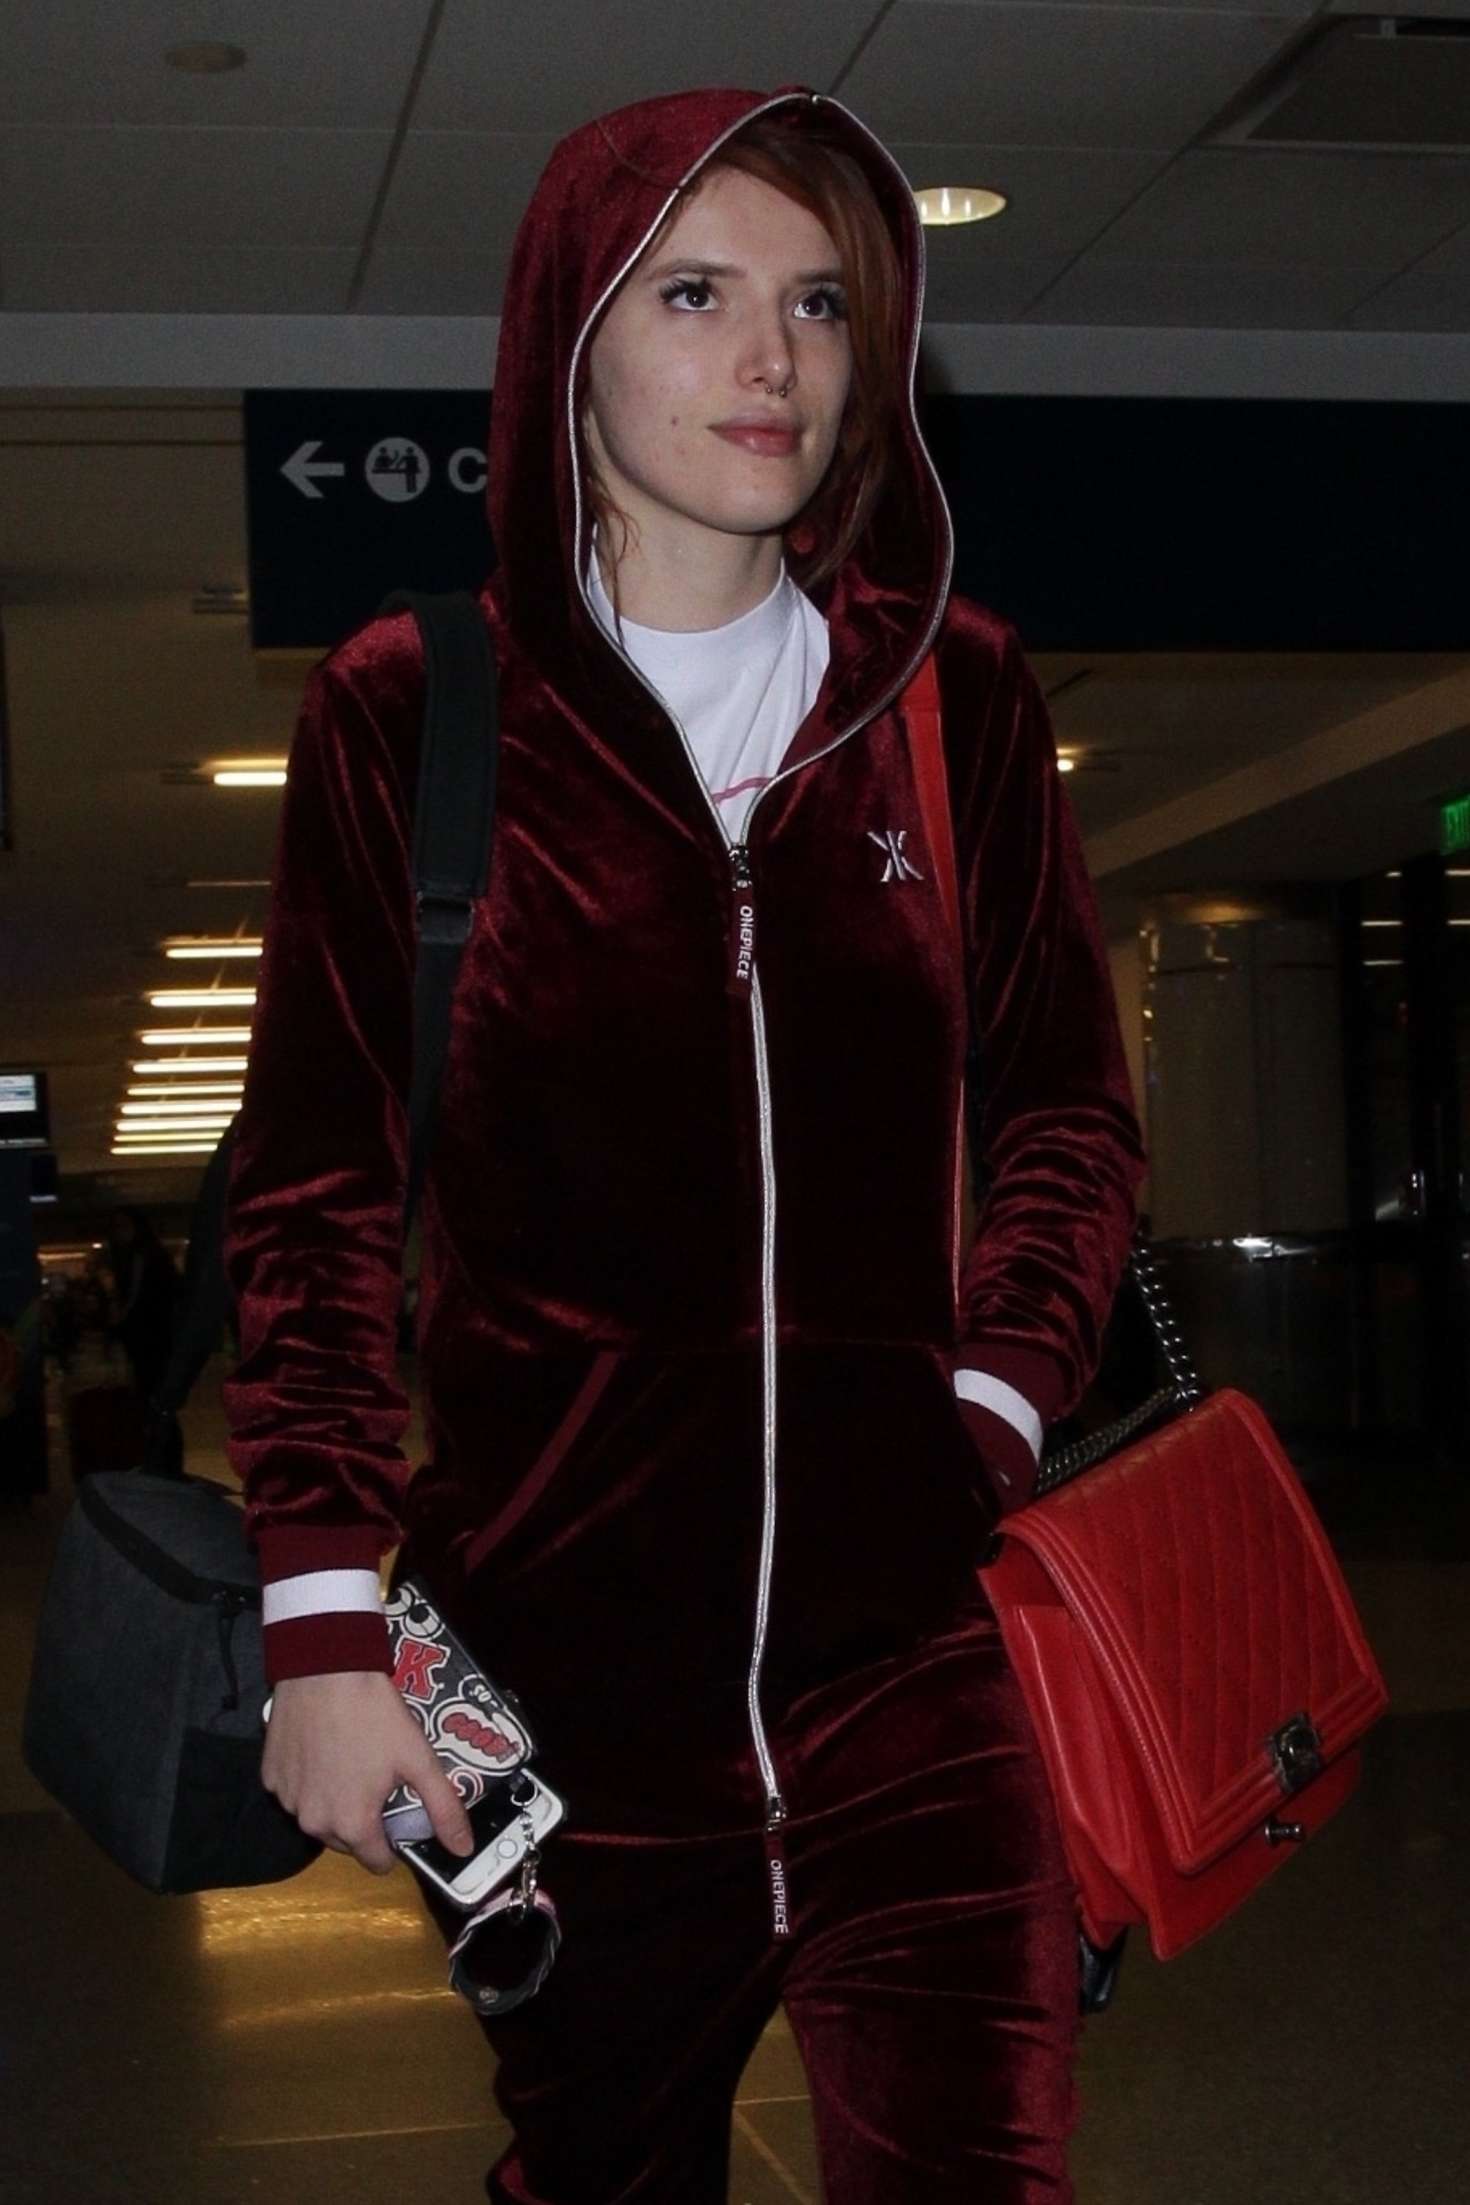 Bella Thorne at LAX International Airport in Los Angeles